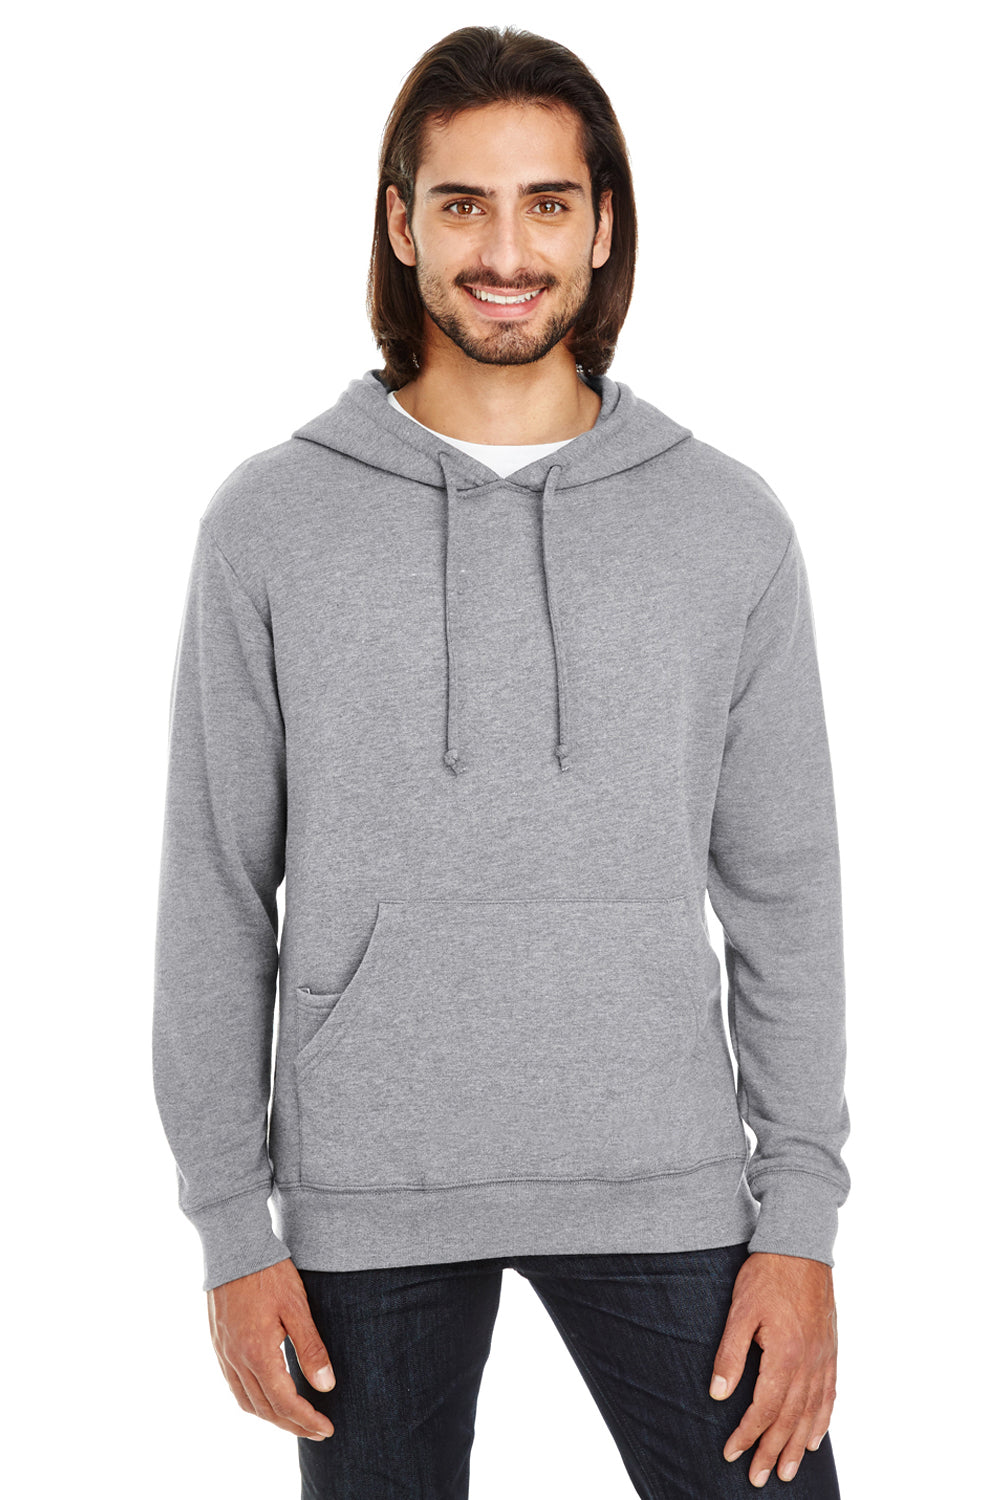 Threadfast Apparel 321H Mens French Terry Hooded Sweatshirt Hoodie Heather Charcoal Grey Front